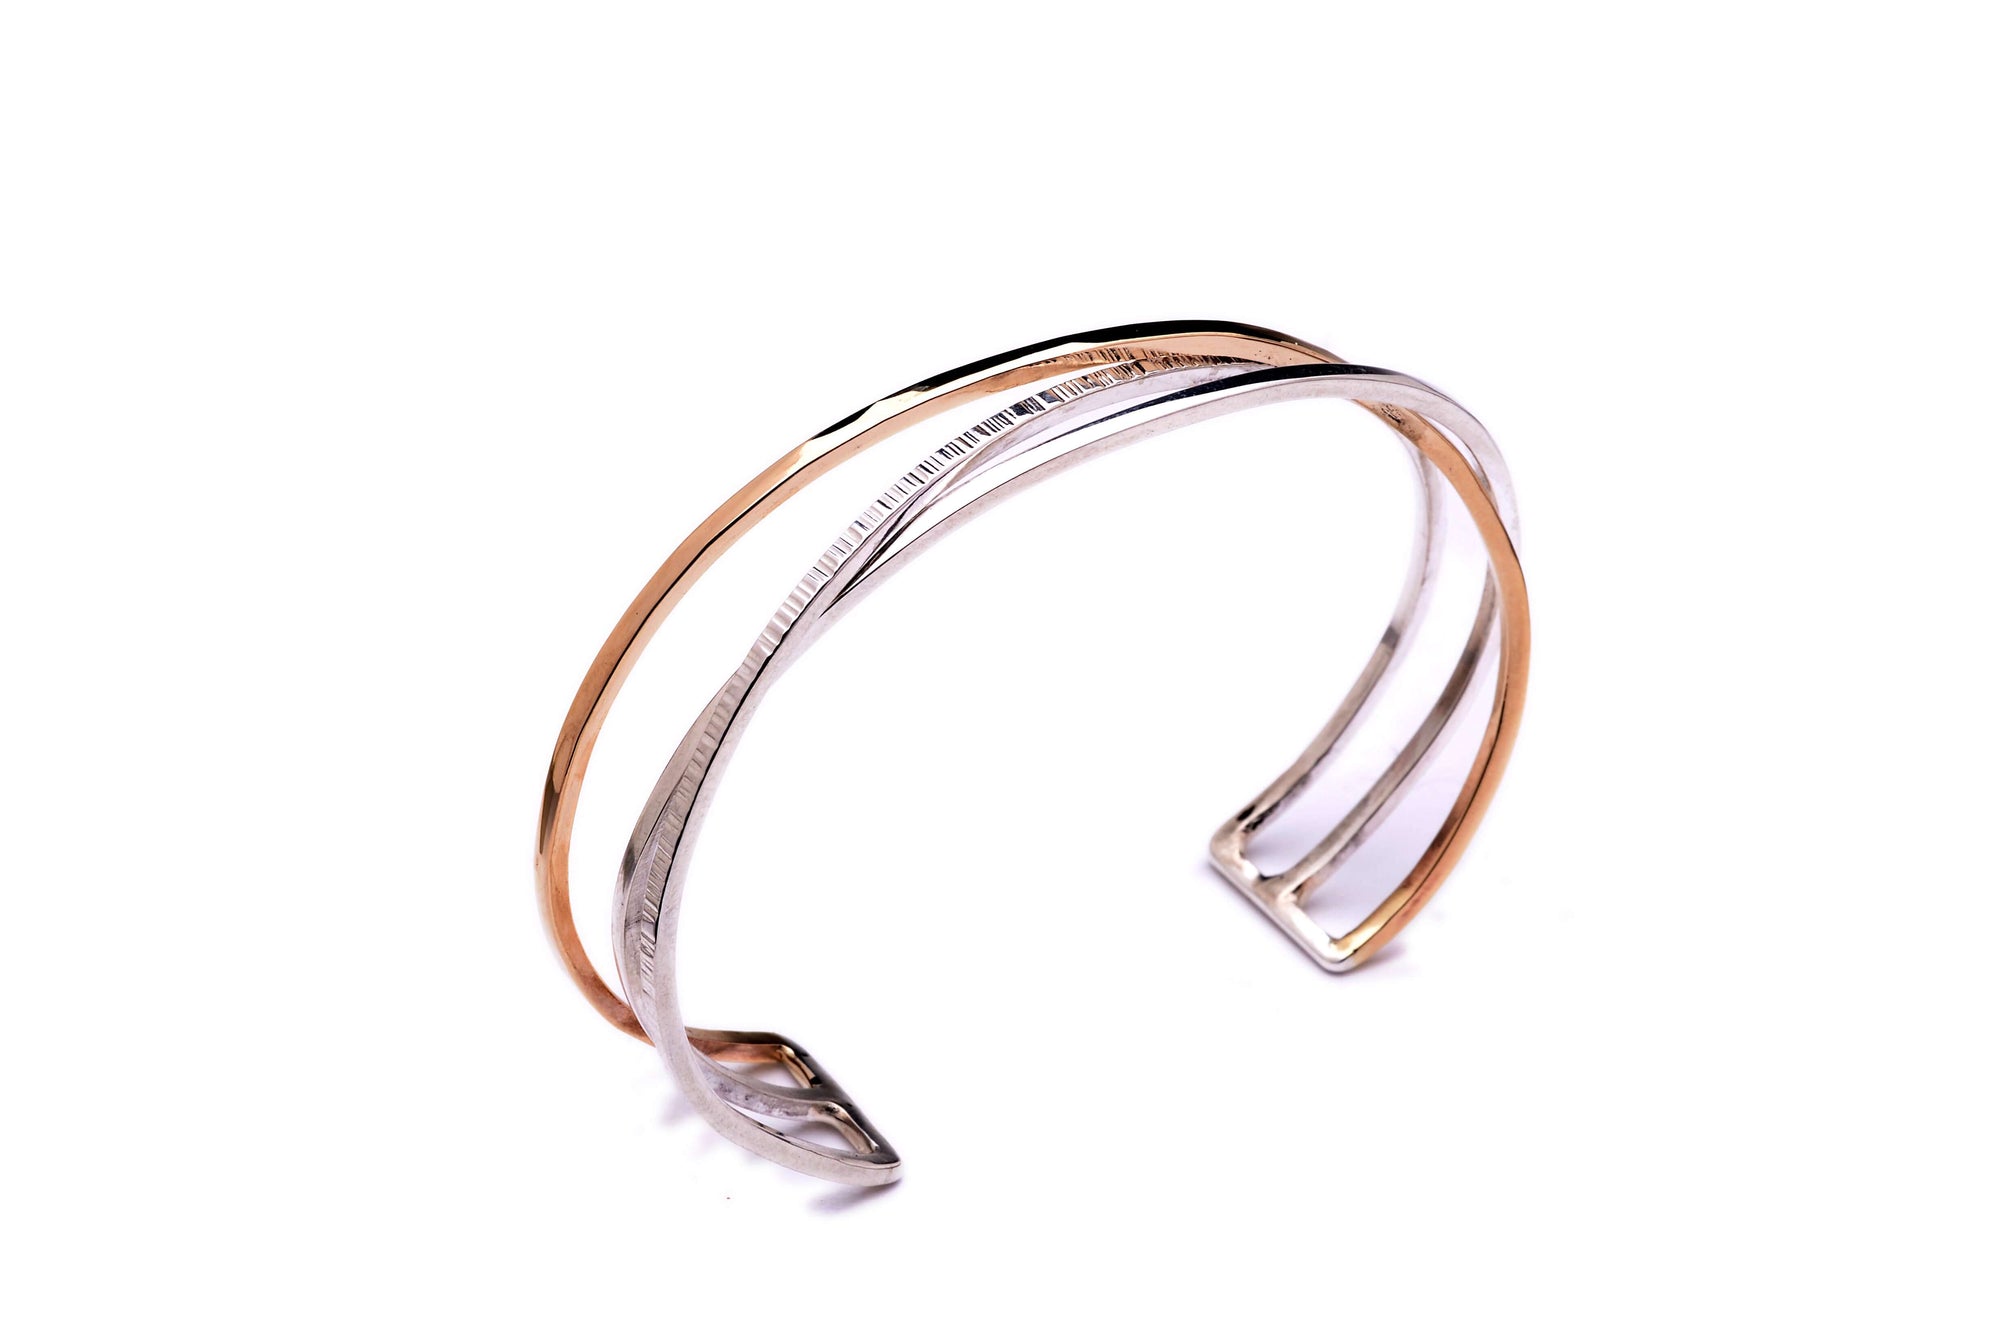 A mixed metal gold and silver cuff bracelet